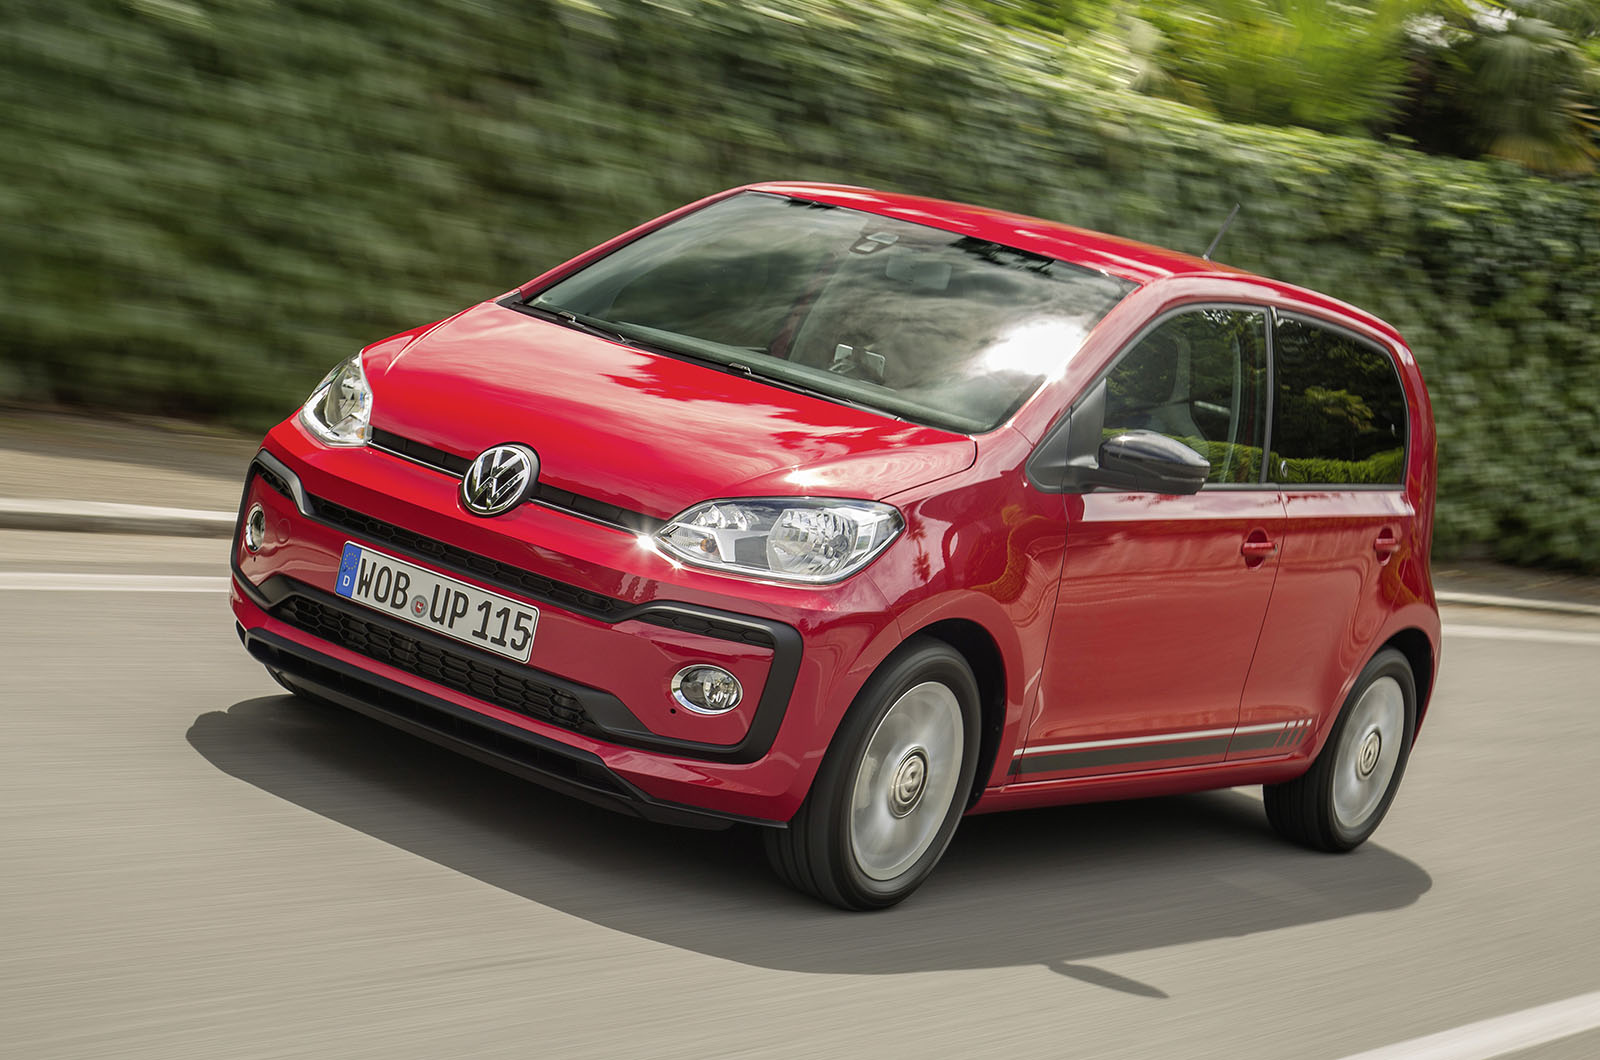 2016 Volkswagen Up 1.0 TSI review review Autocar